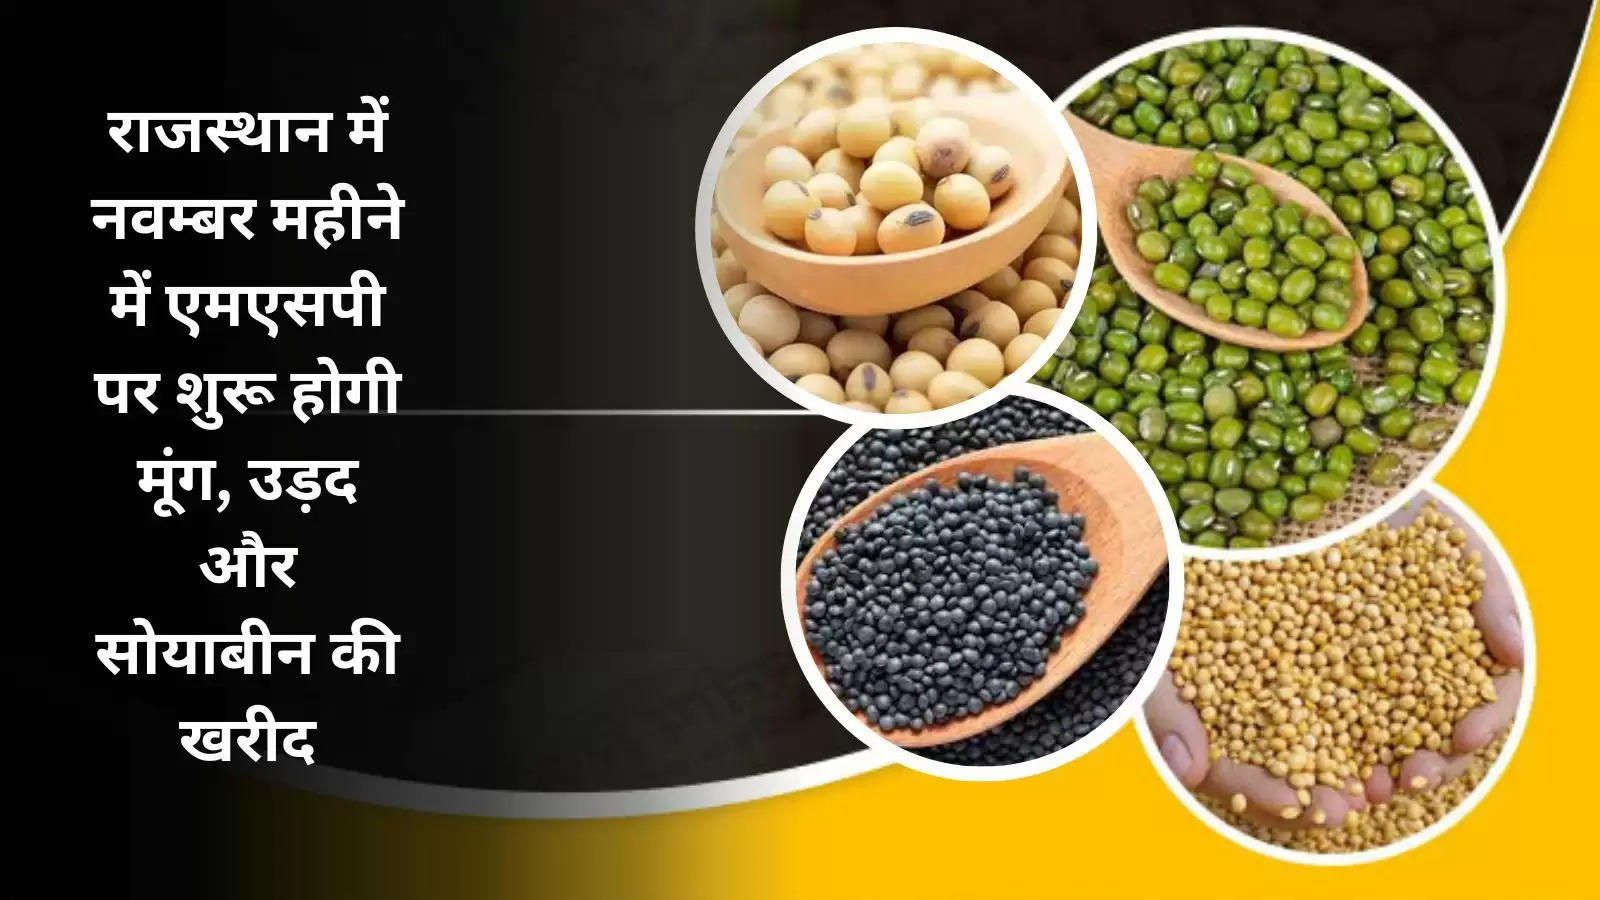 purchase-of-moong-urad-and-soyabean-to-start